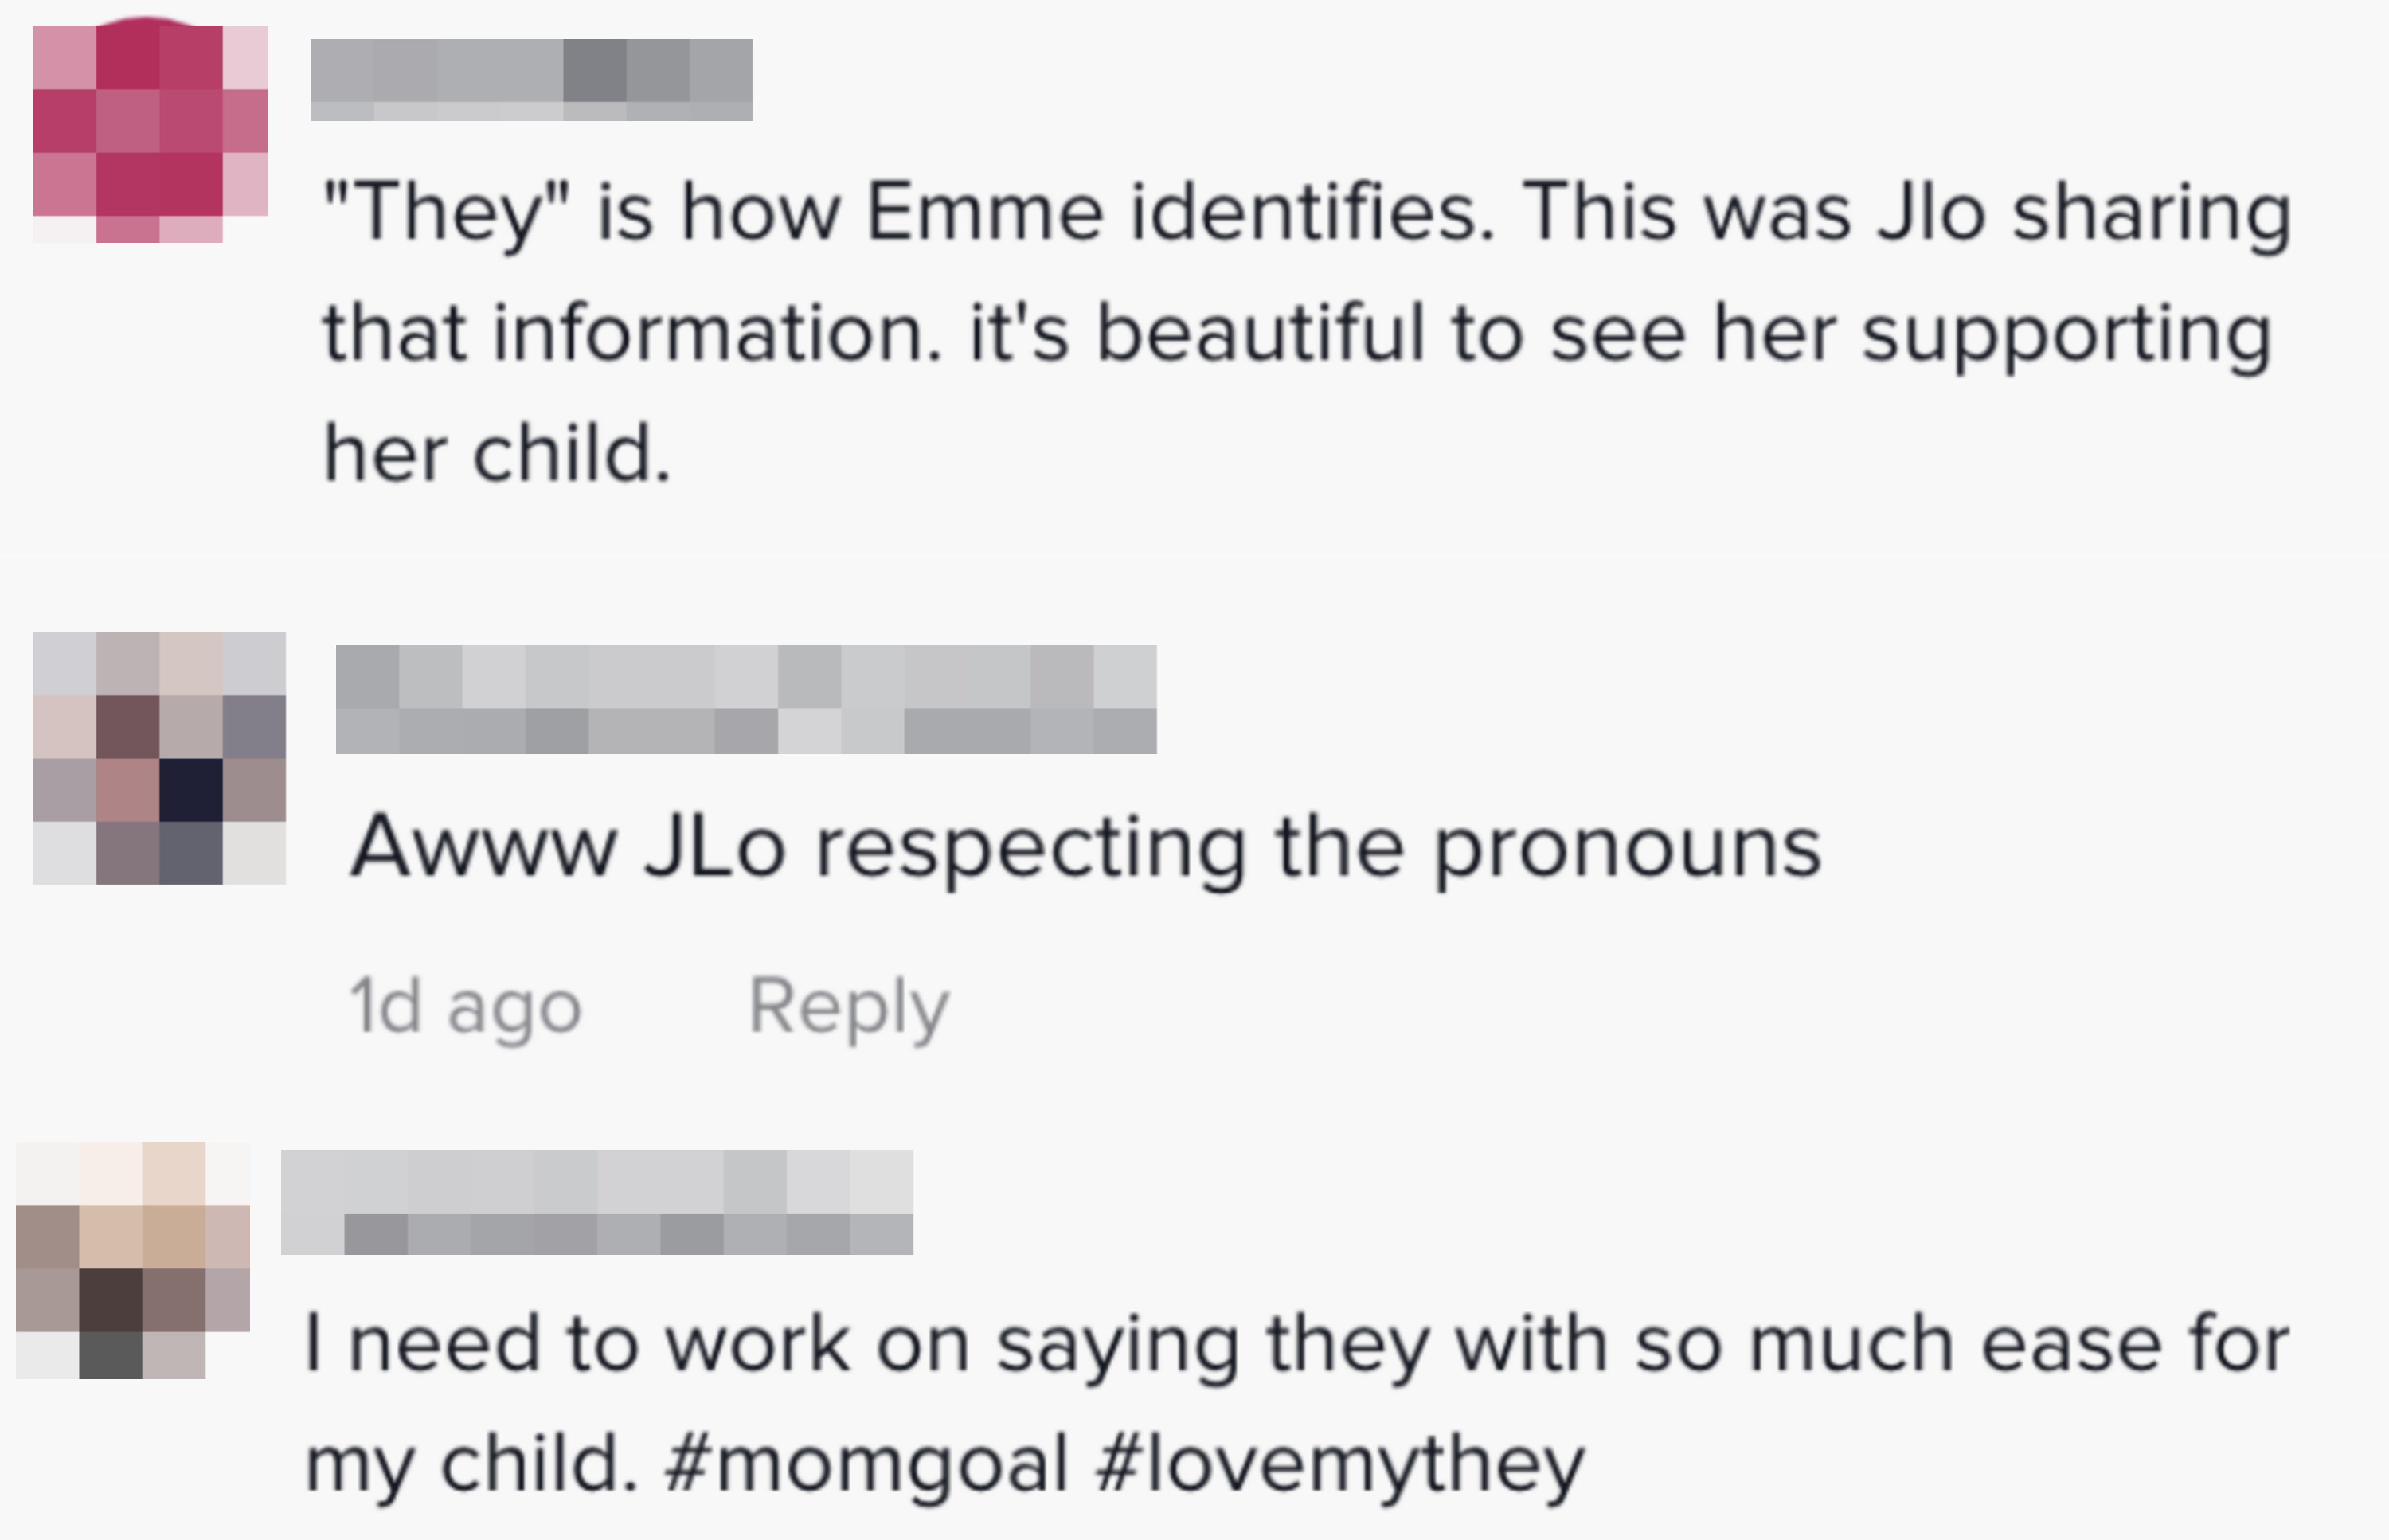 Screenshots of comments reading, &quot;&#x27;They&#x27; is how Emme identifies. This was Jlo sharing that information. it&#x27;s beautiful to see her supporting her child.&quot; &quot;Awwww JLo respecting the pronouns.&quot;